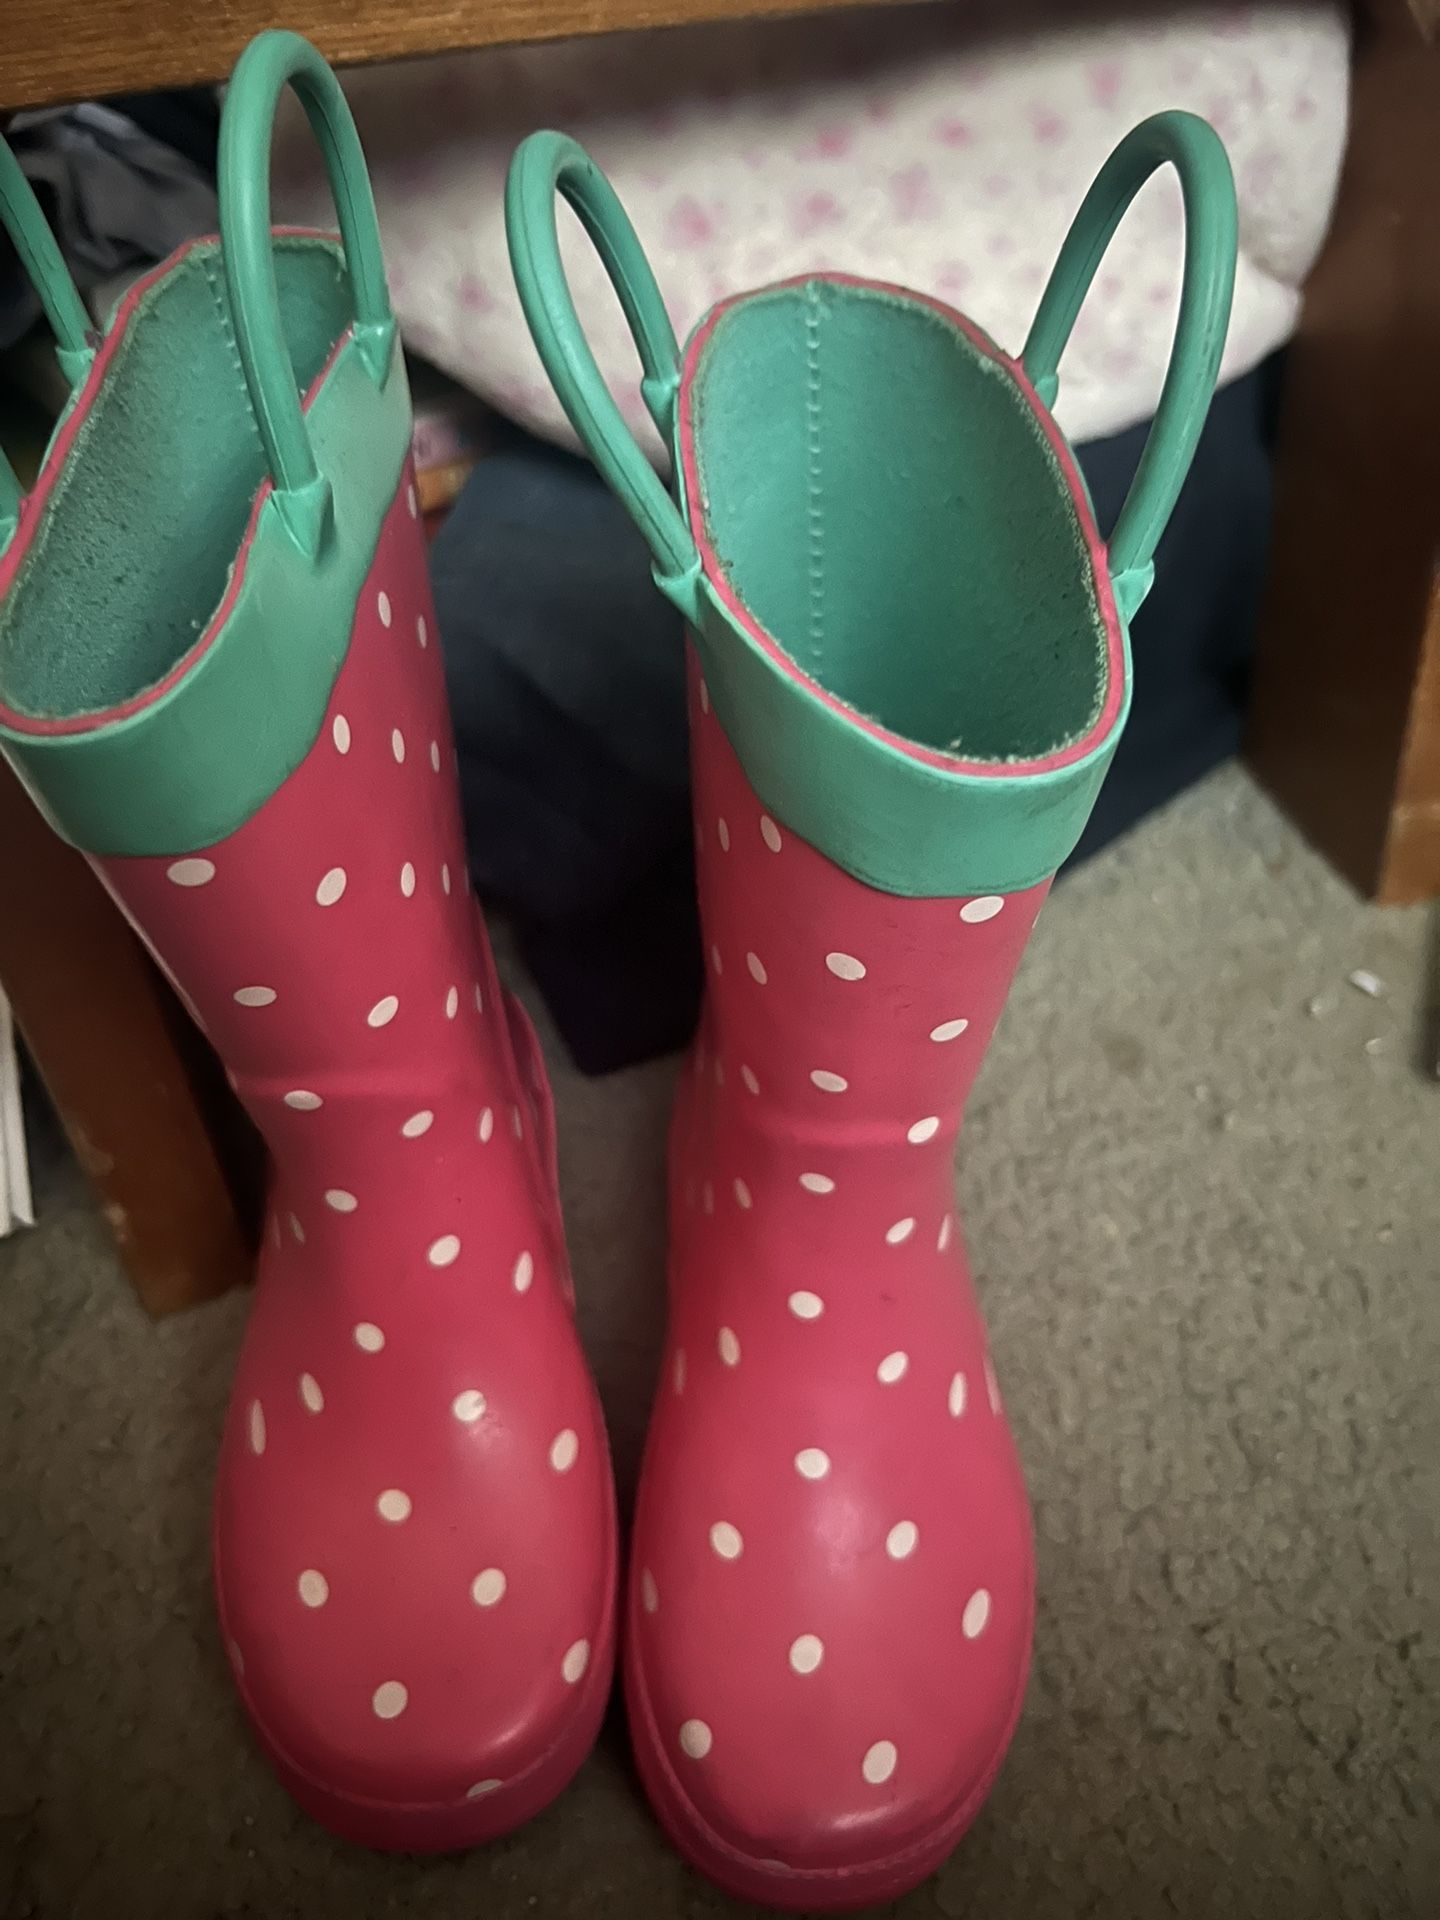 Toddler Rain Boots Size 8 